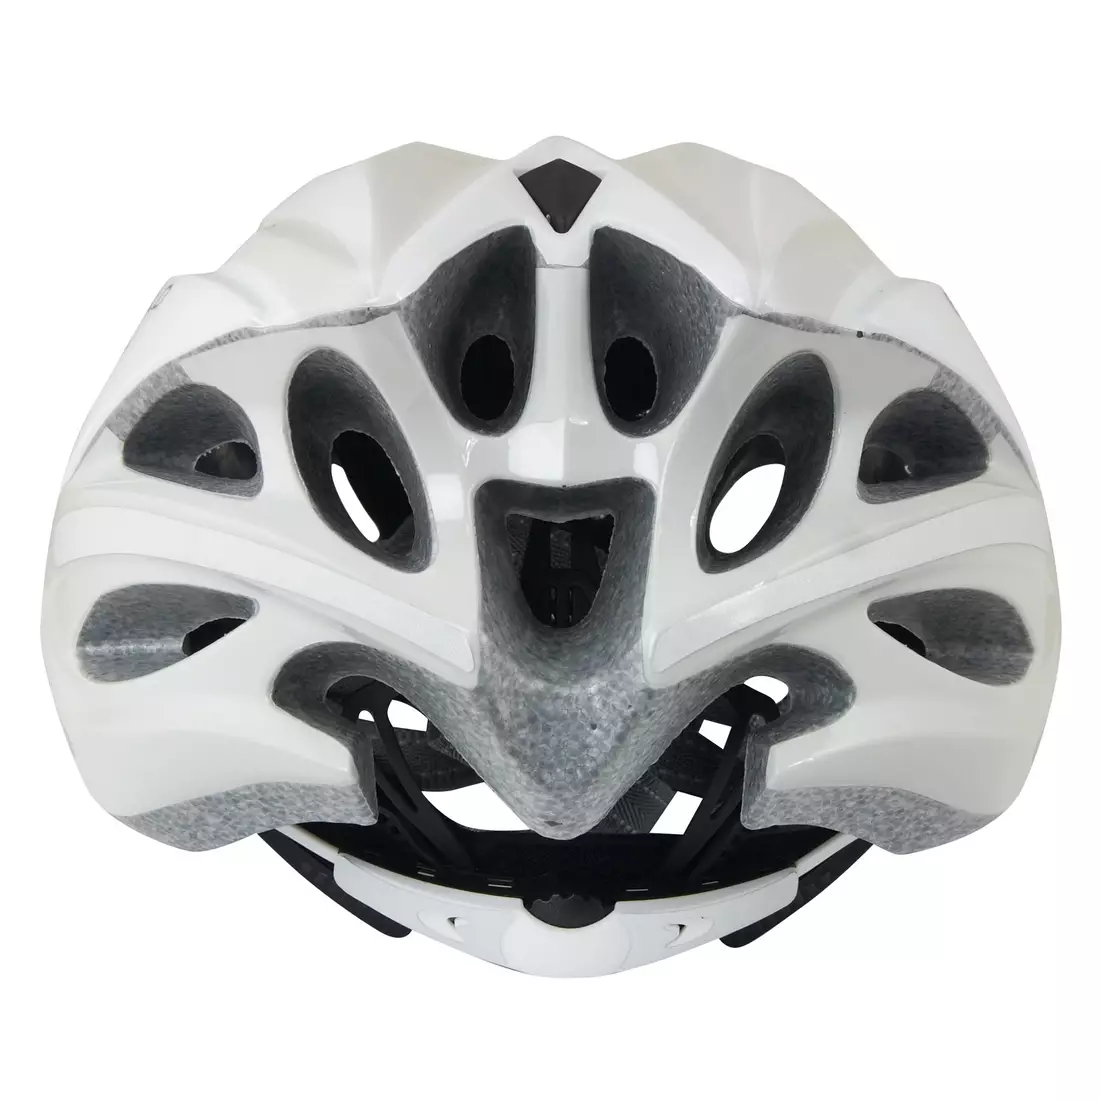 FORCE BUFFALO bicycle helmet, gray and white